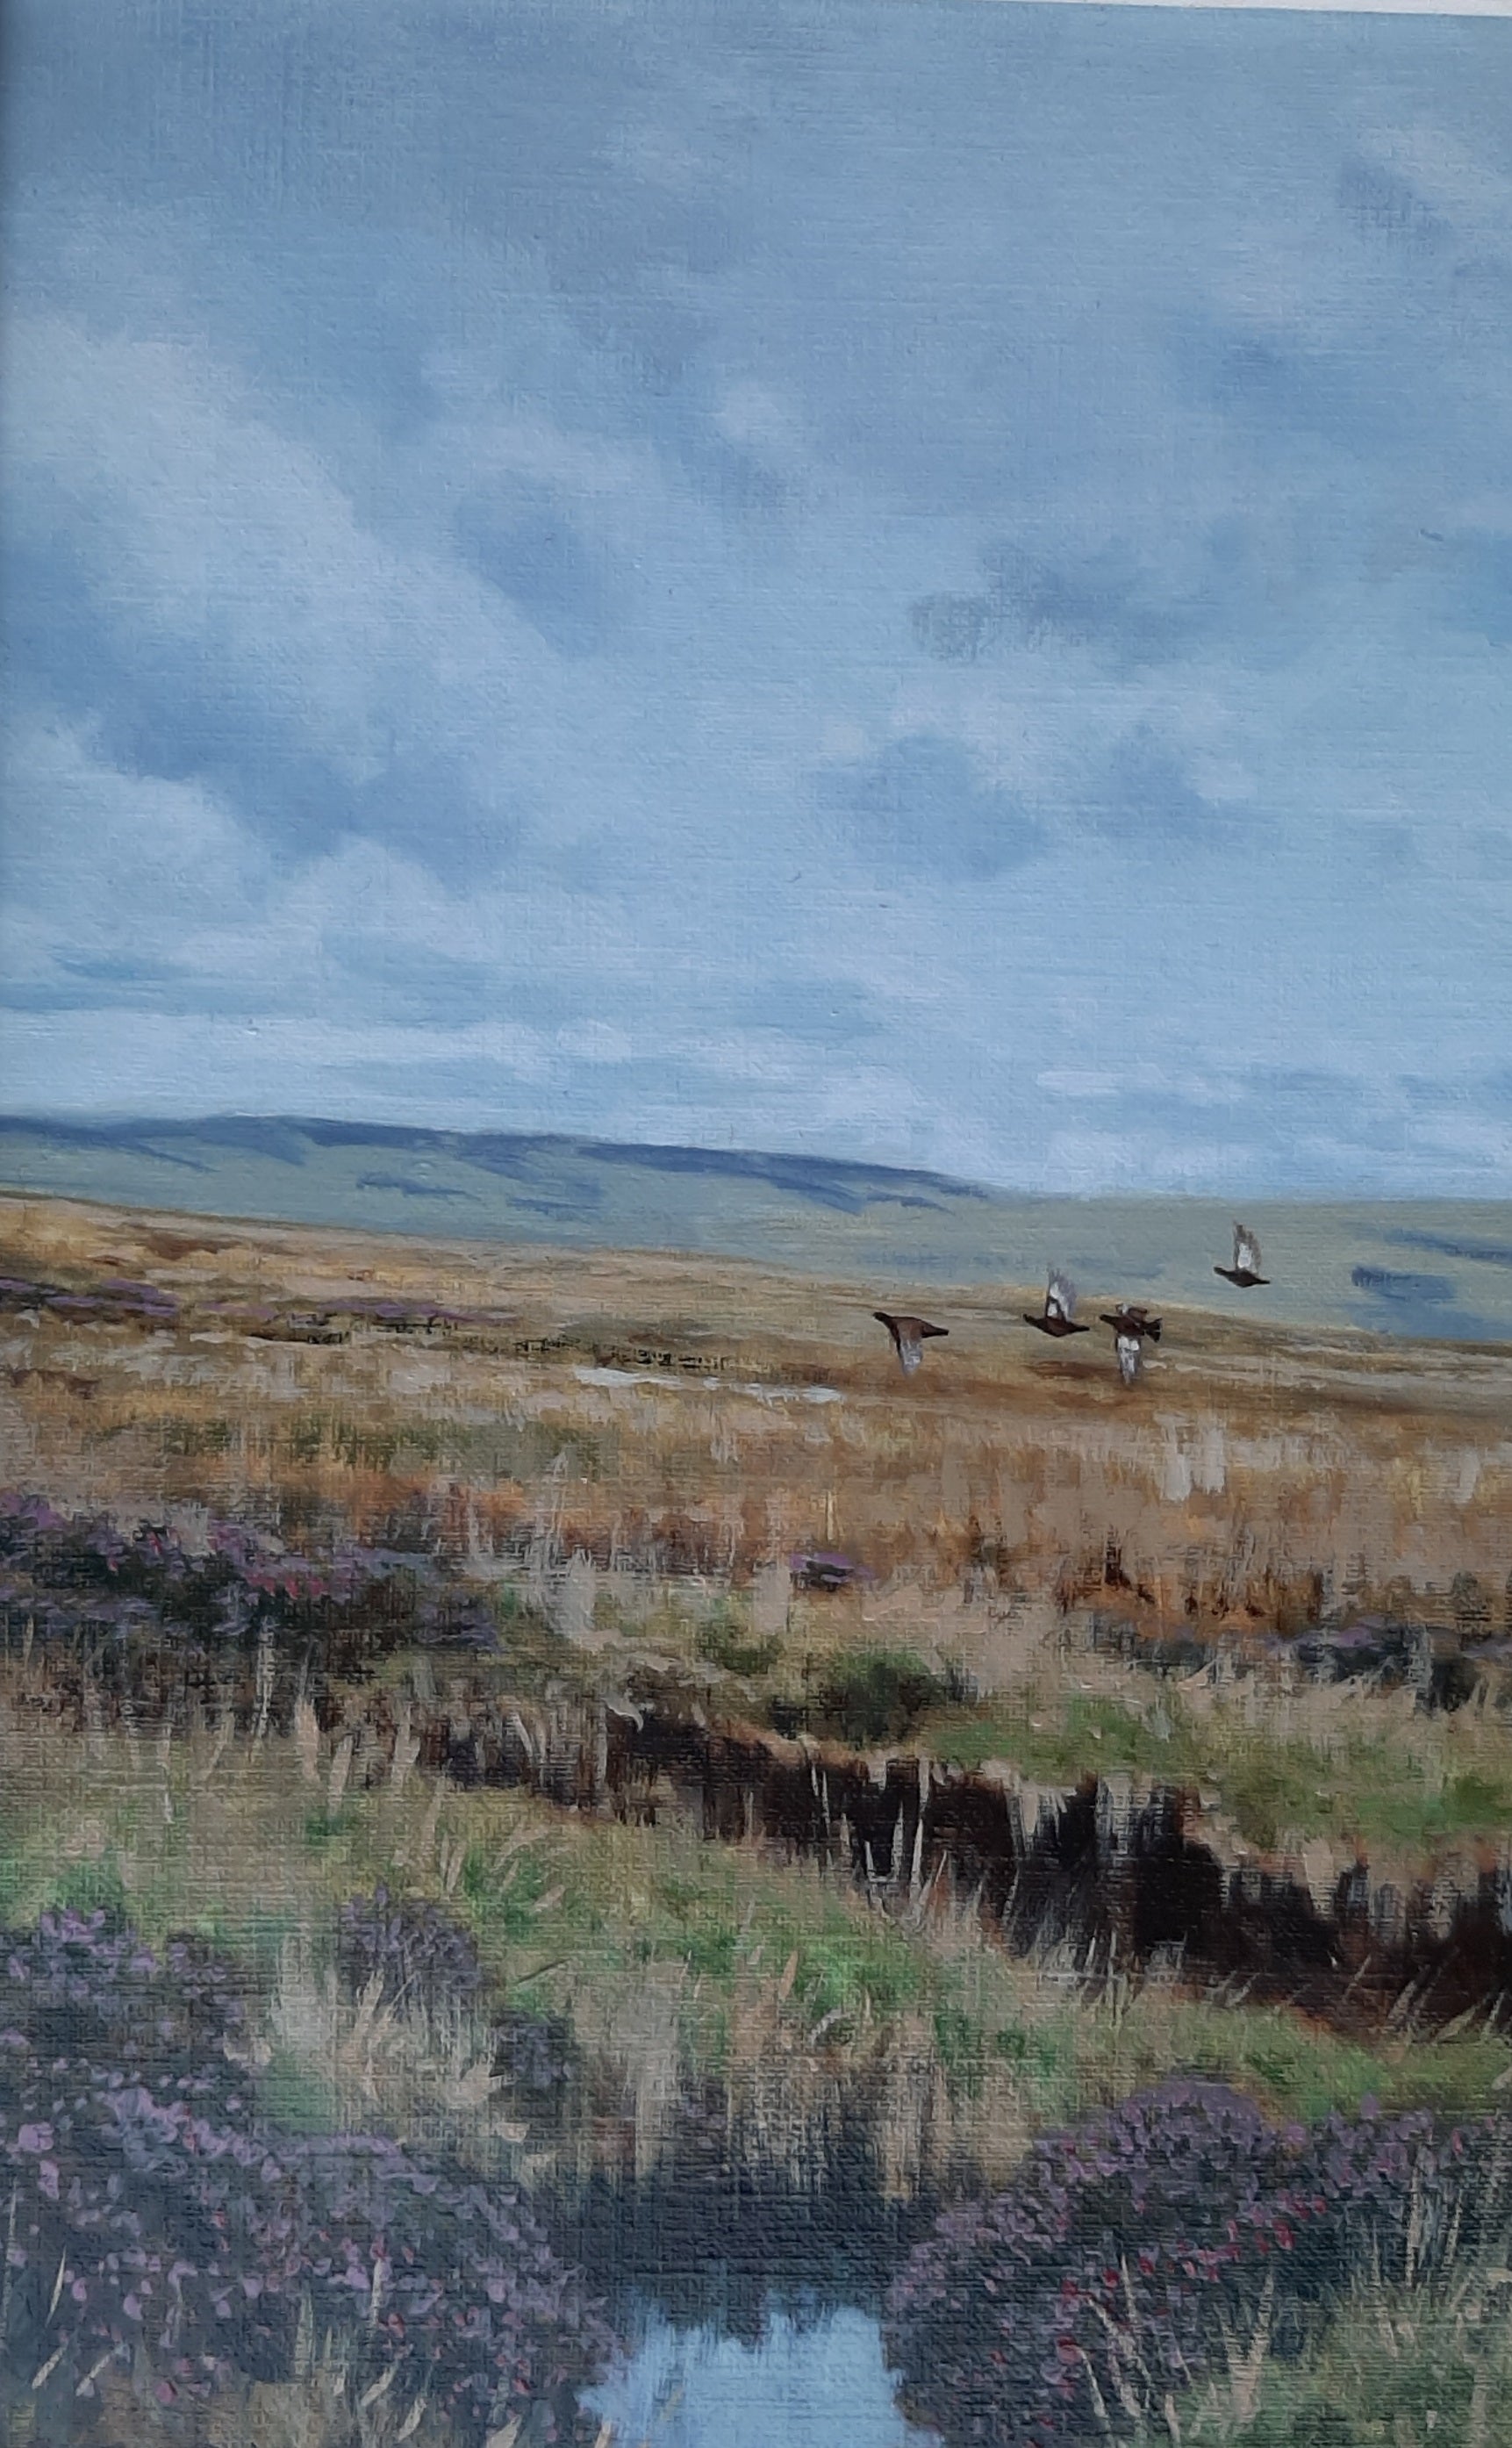 'Crossing Grouse' - Original Oil Painting by Alistair Makinson - 20 x 30cm